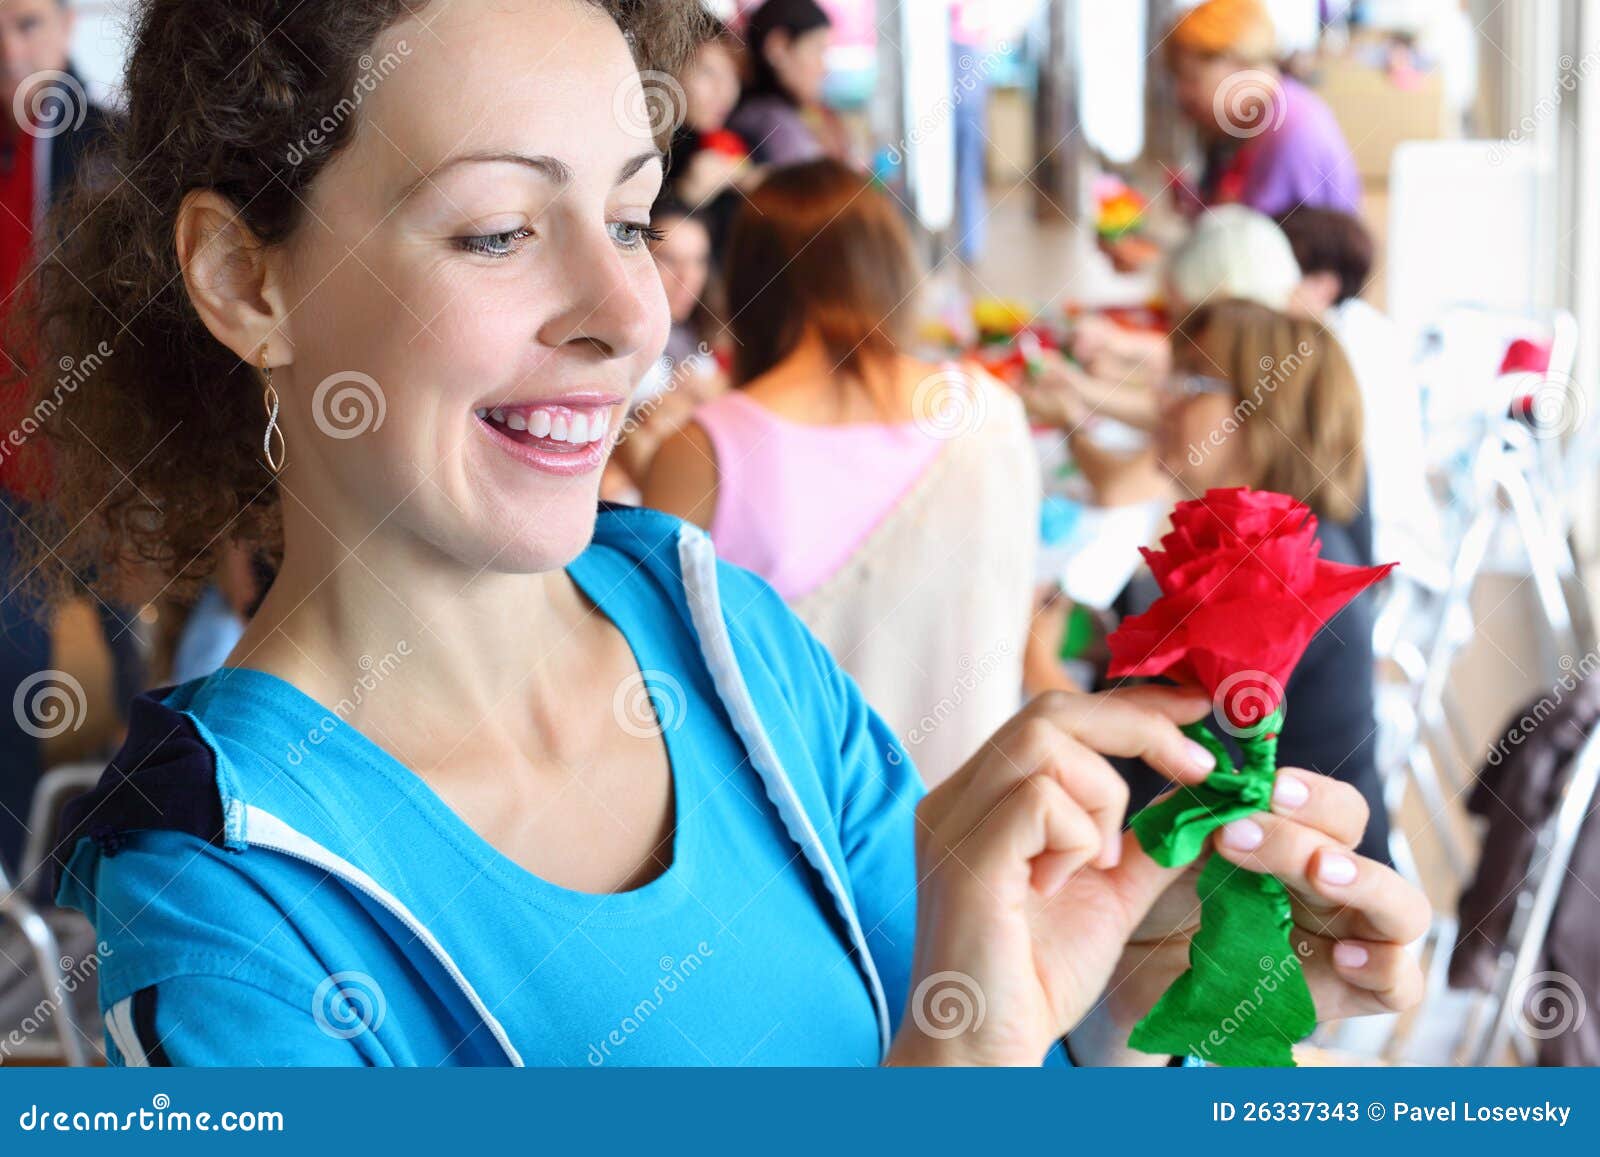 woman holds artificial red rose